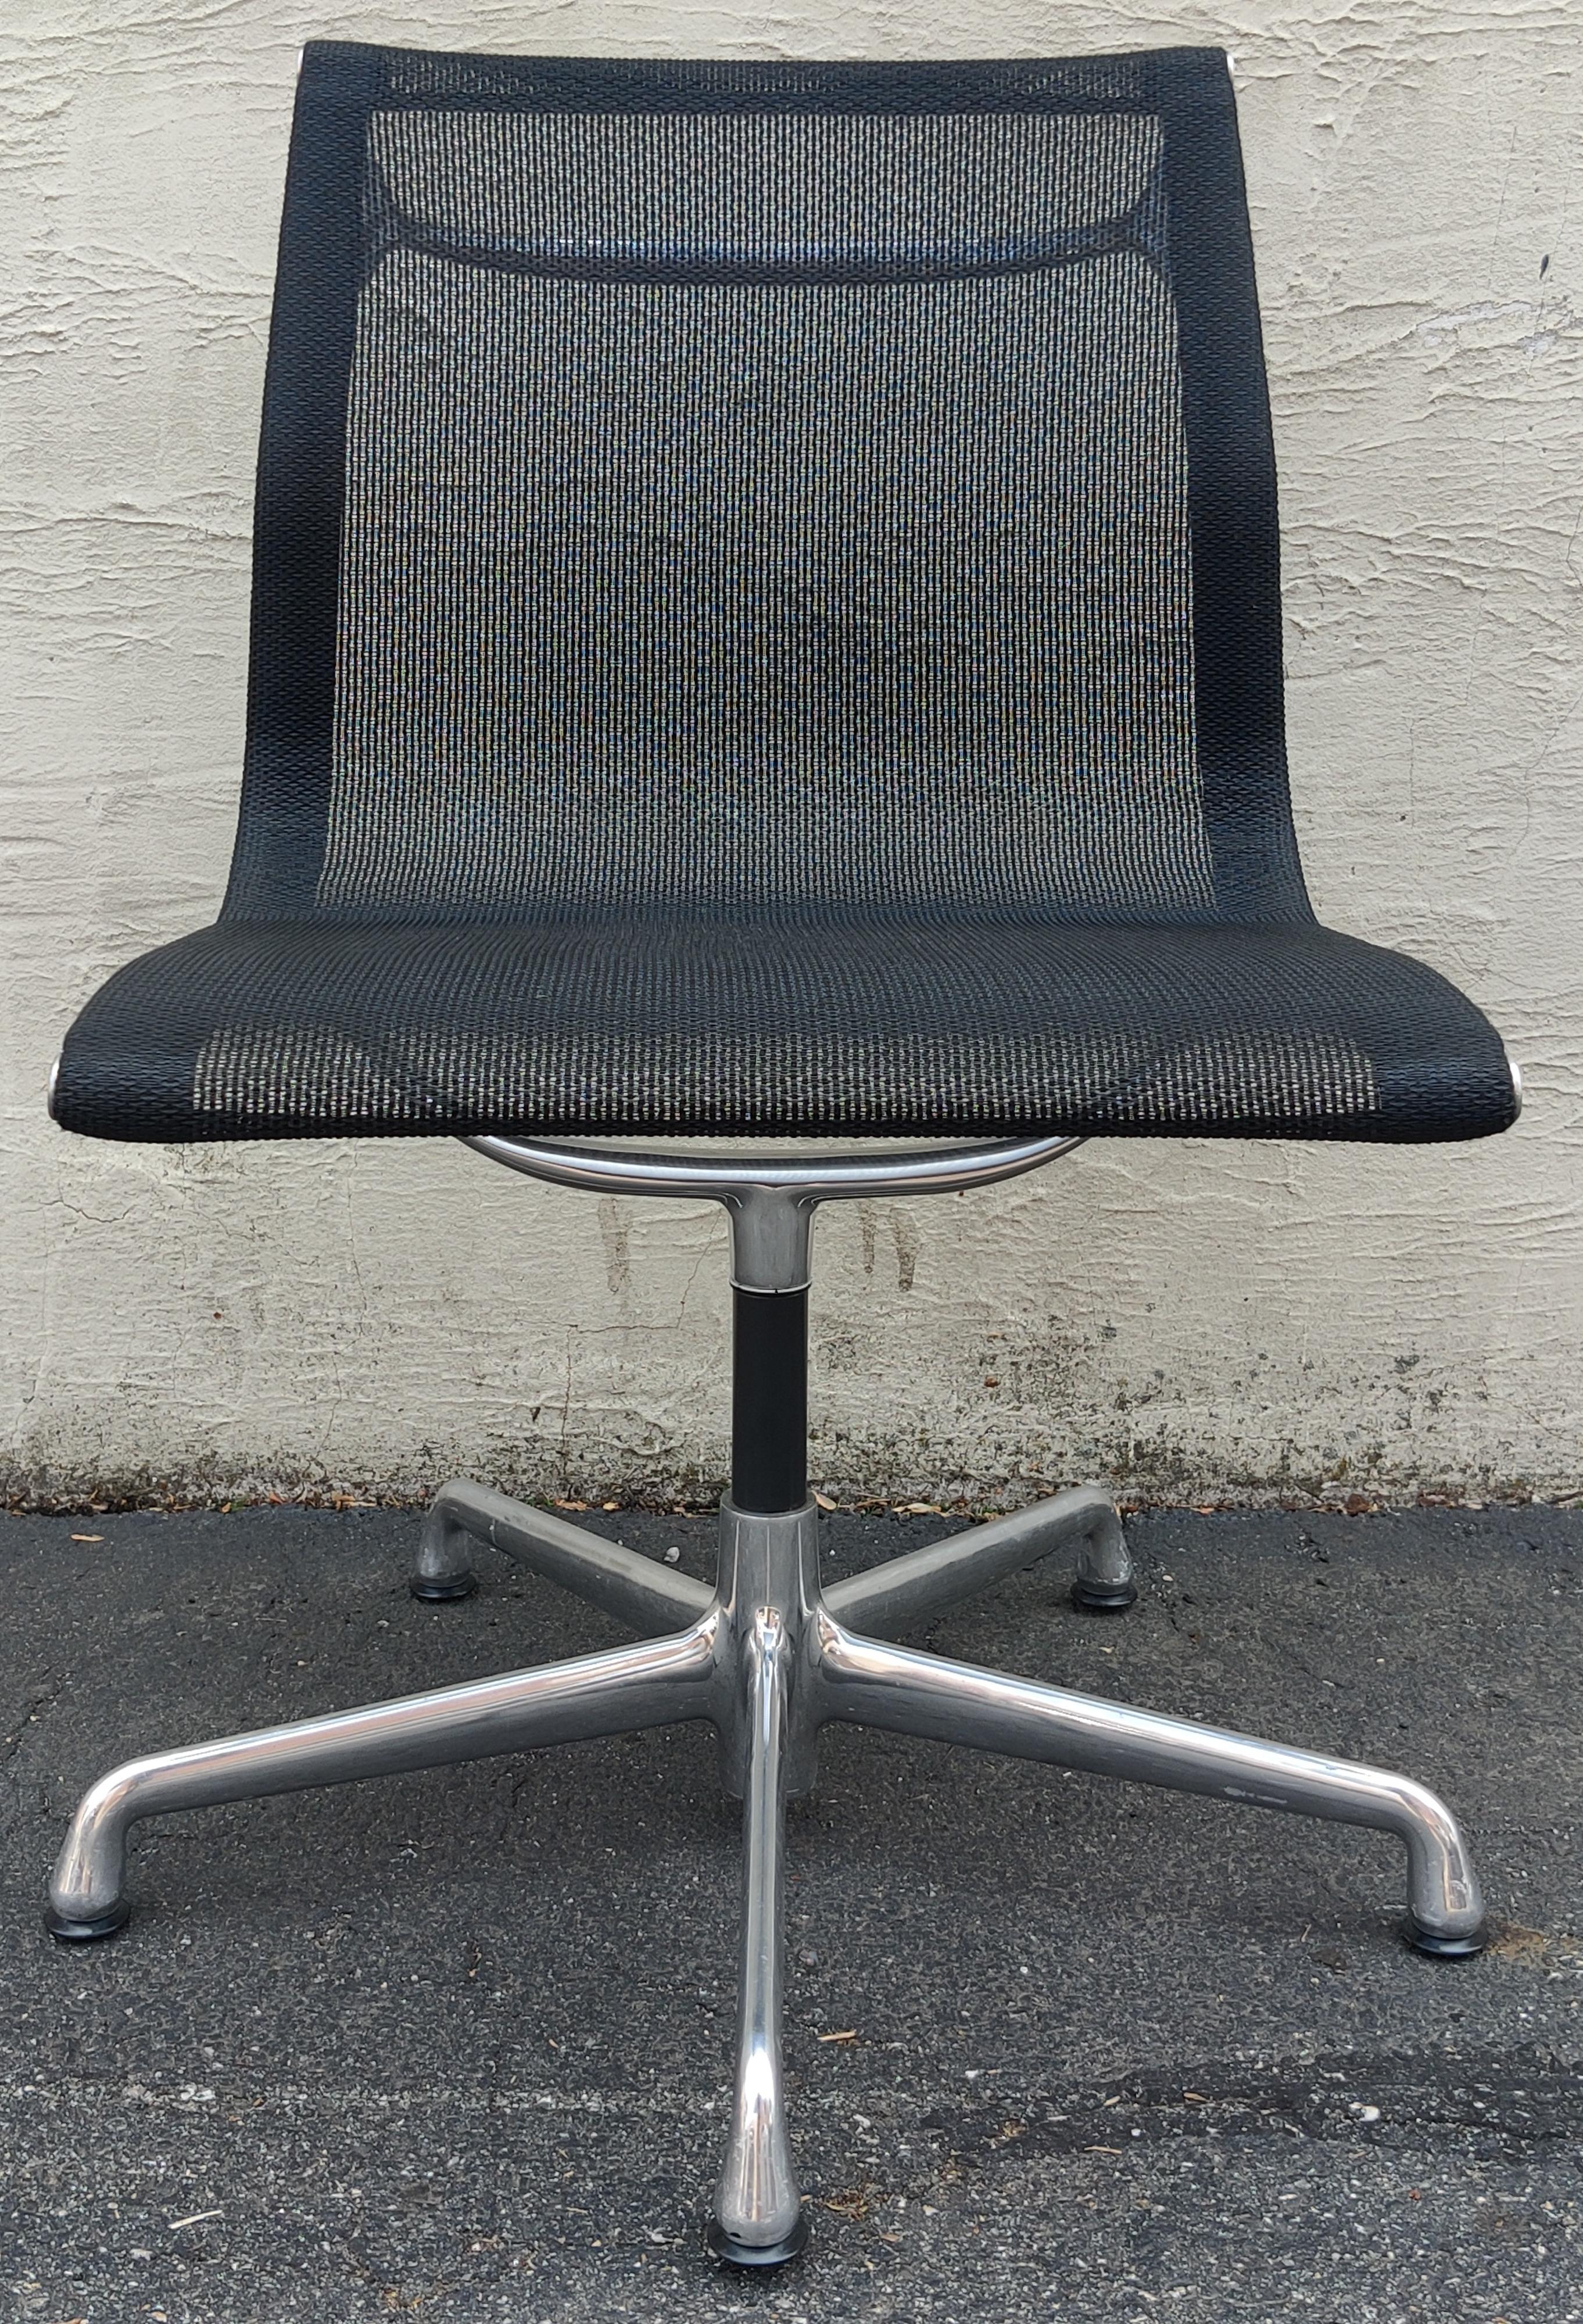 This line of chairs was conceived in the 1960s by Charles and Ray Eames for Herman Miller. Over the years, the line has evolved into many variants and been dubbed Aluminum Group. This pair of chairs has 5 prong bases and no arms for a design with